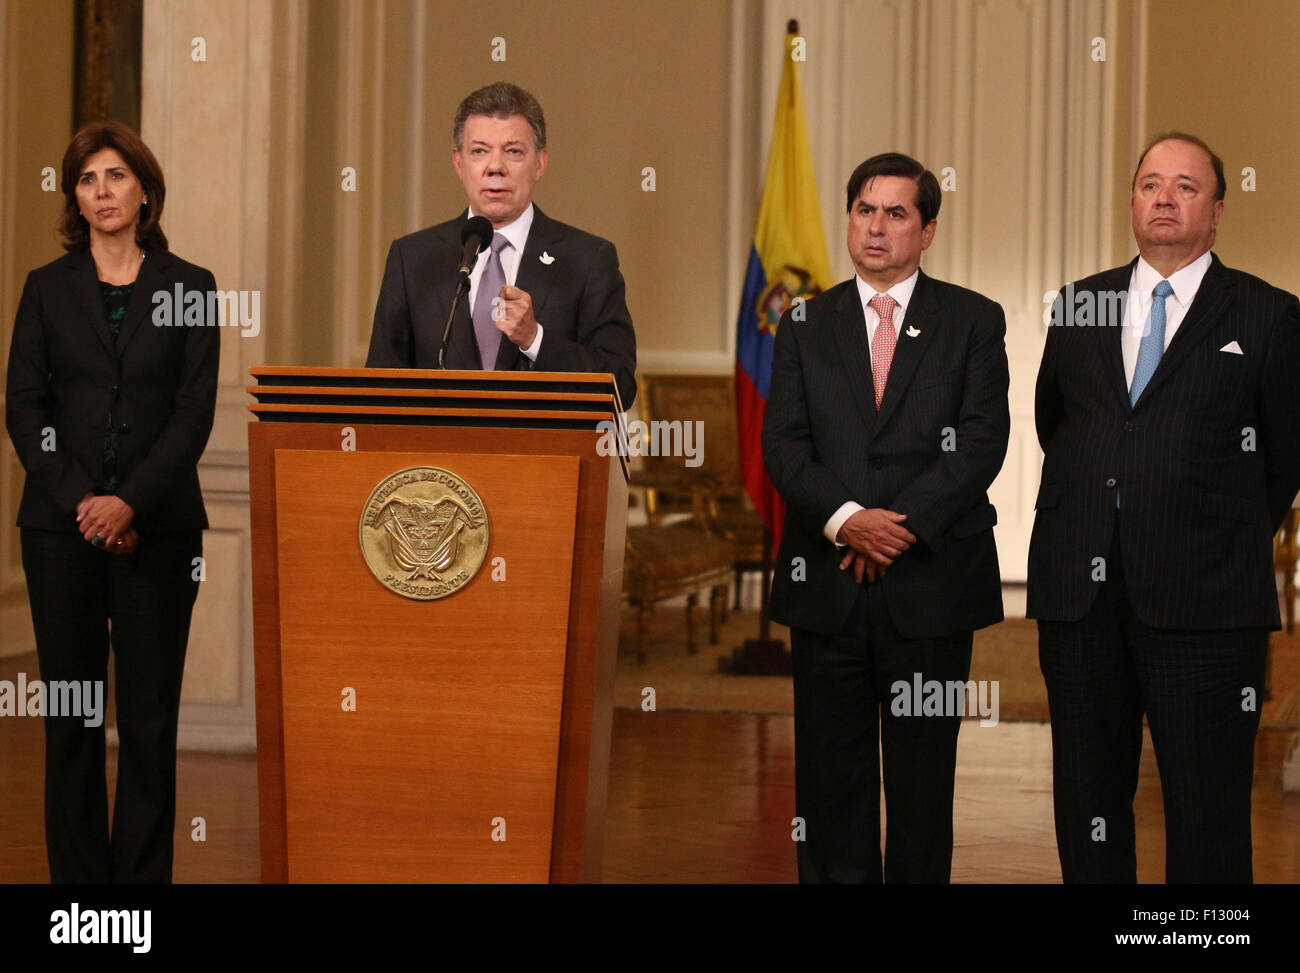 (150826) -- BOGOTA, Aug. 26, 2015 (Xinhua) -- Image provided by Colombia's Presidency shows Colombian President Juan Manuel Santos (2nd, L) delivering a speech, accompanied by the Colombian Foreign Minister Maria Angela Holguin (1st, L), Minister of Interior Juan Fernando Cristo (2nd, R) and Defense Minister Luis Carlos Villegas (1st, R), at the Narino Palace in Bogota, Colombia, on Aug. 25, 2015. Juan Manuel Santos reiterated that the differences between Colombia and Venezuela can be overcome with 'dialogue' and 'diplomacy', following the closure of an important border post between the two co Stock Photo